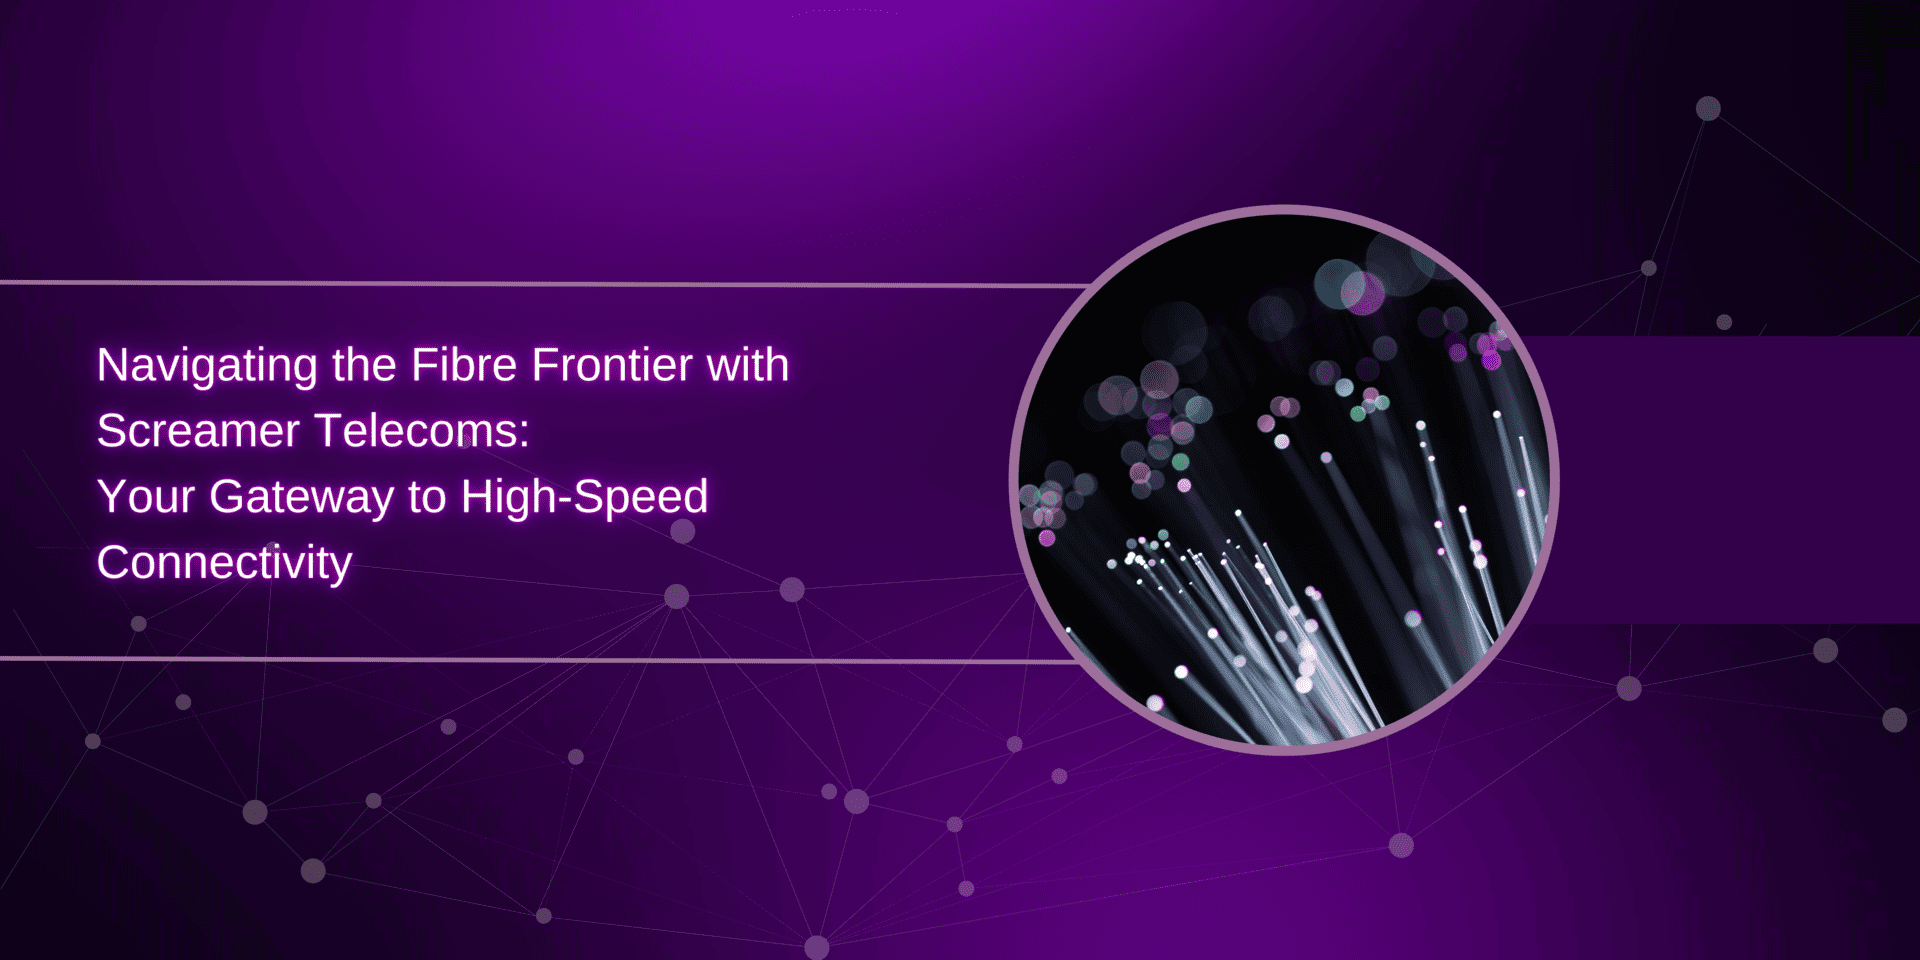 Experience fiber to the home like never before